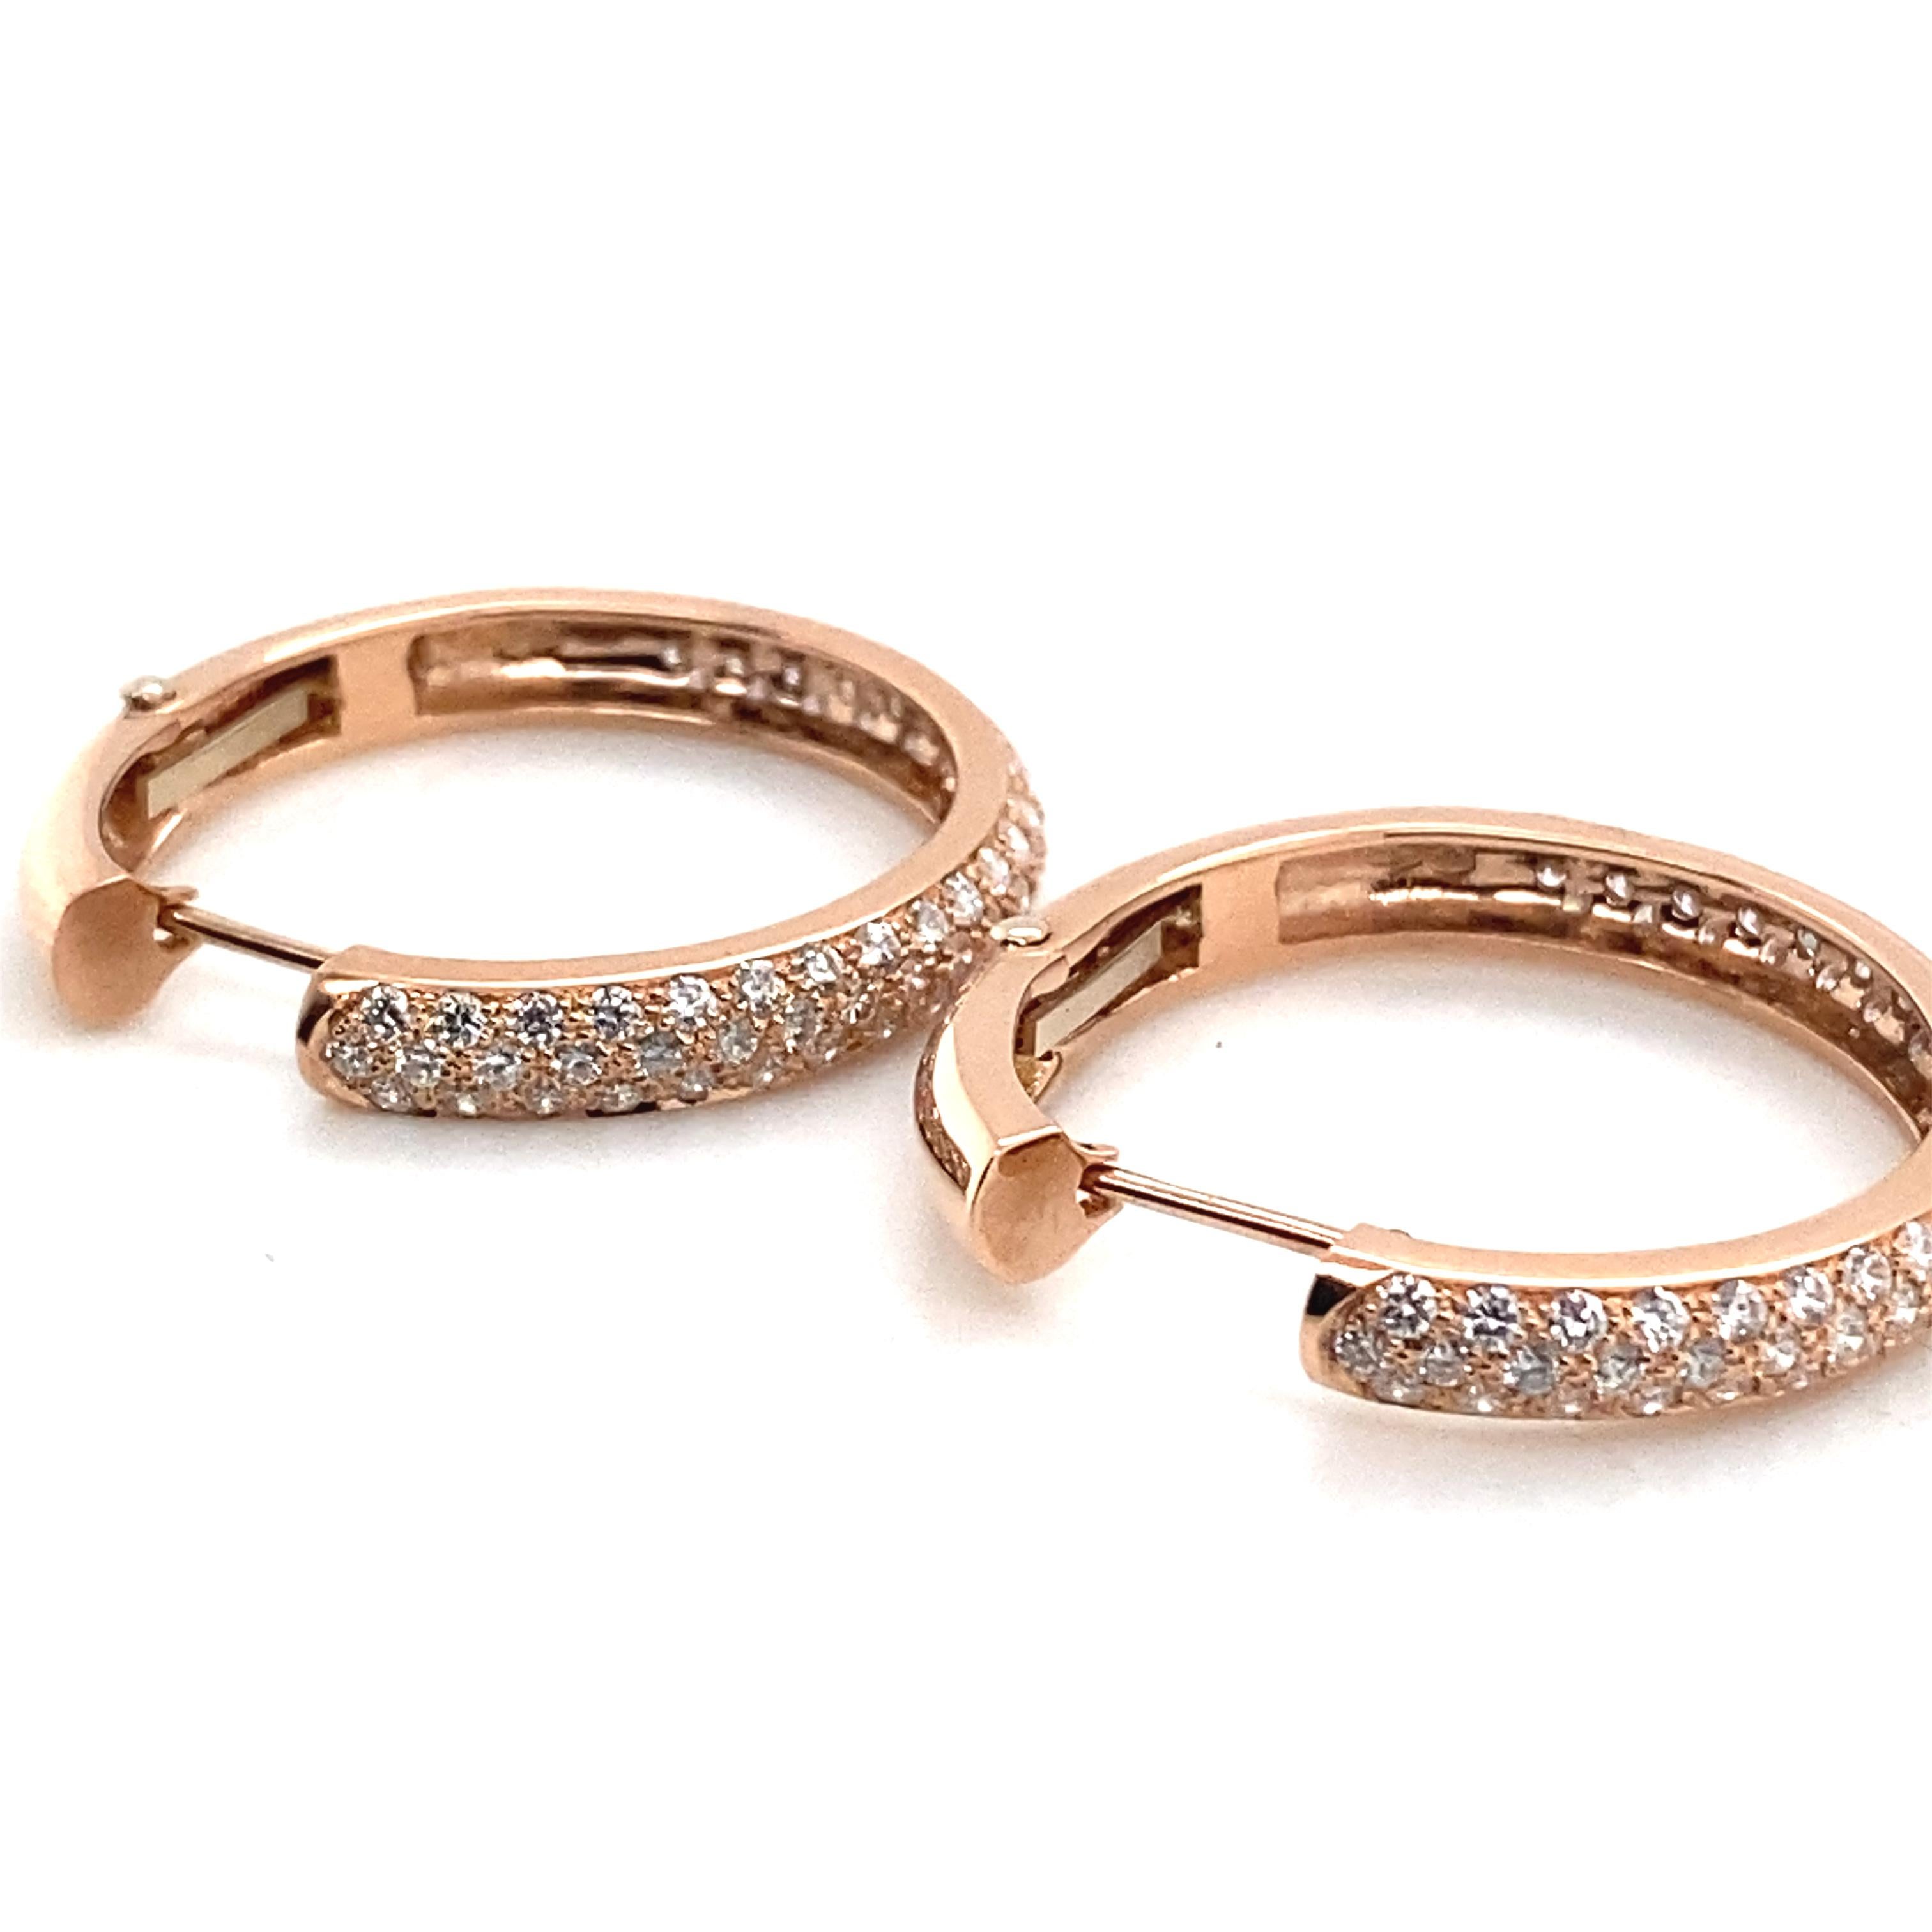 Brilliant Cut 18 Karat Pink Gold and Diamonds Pave Earrings